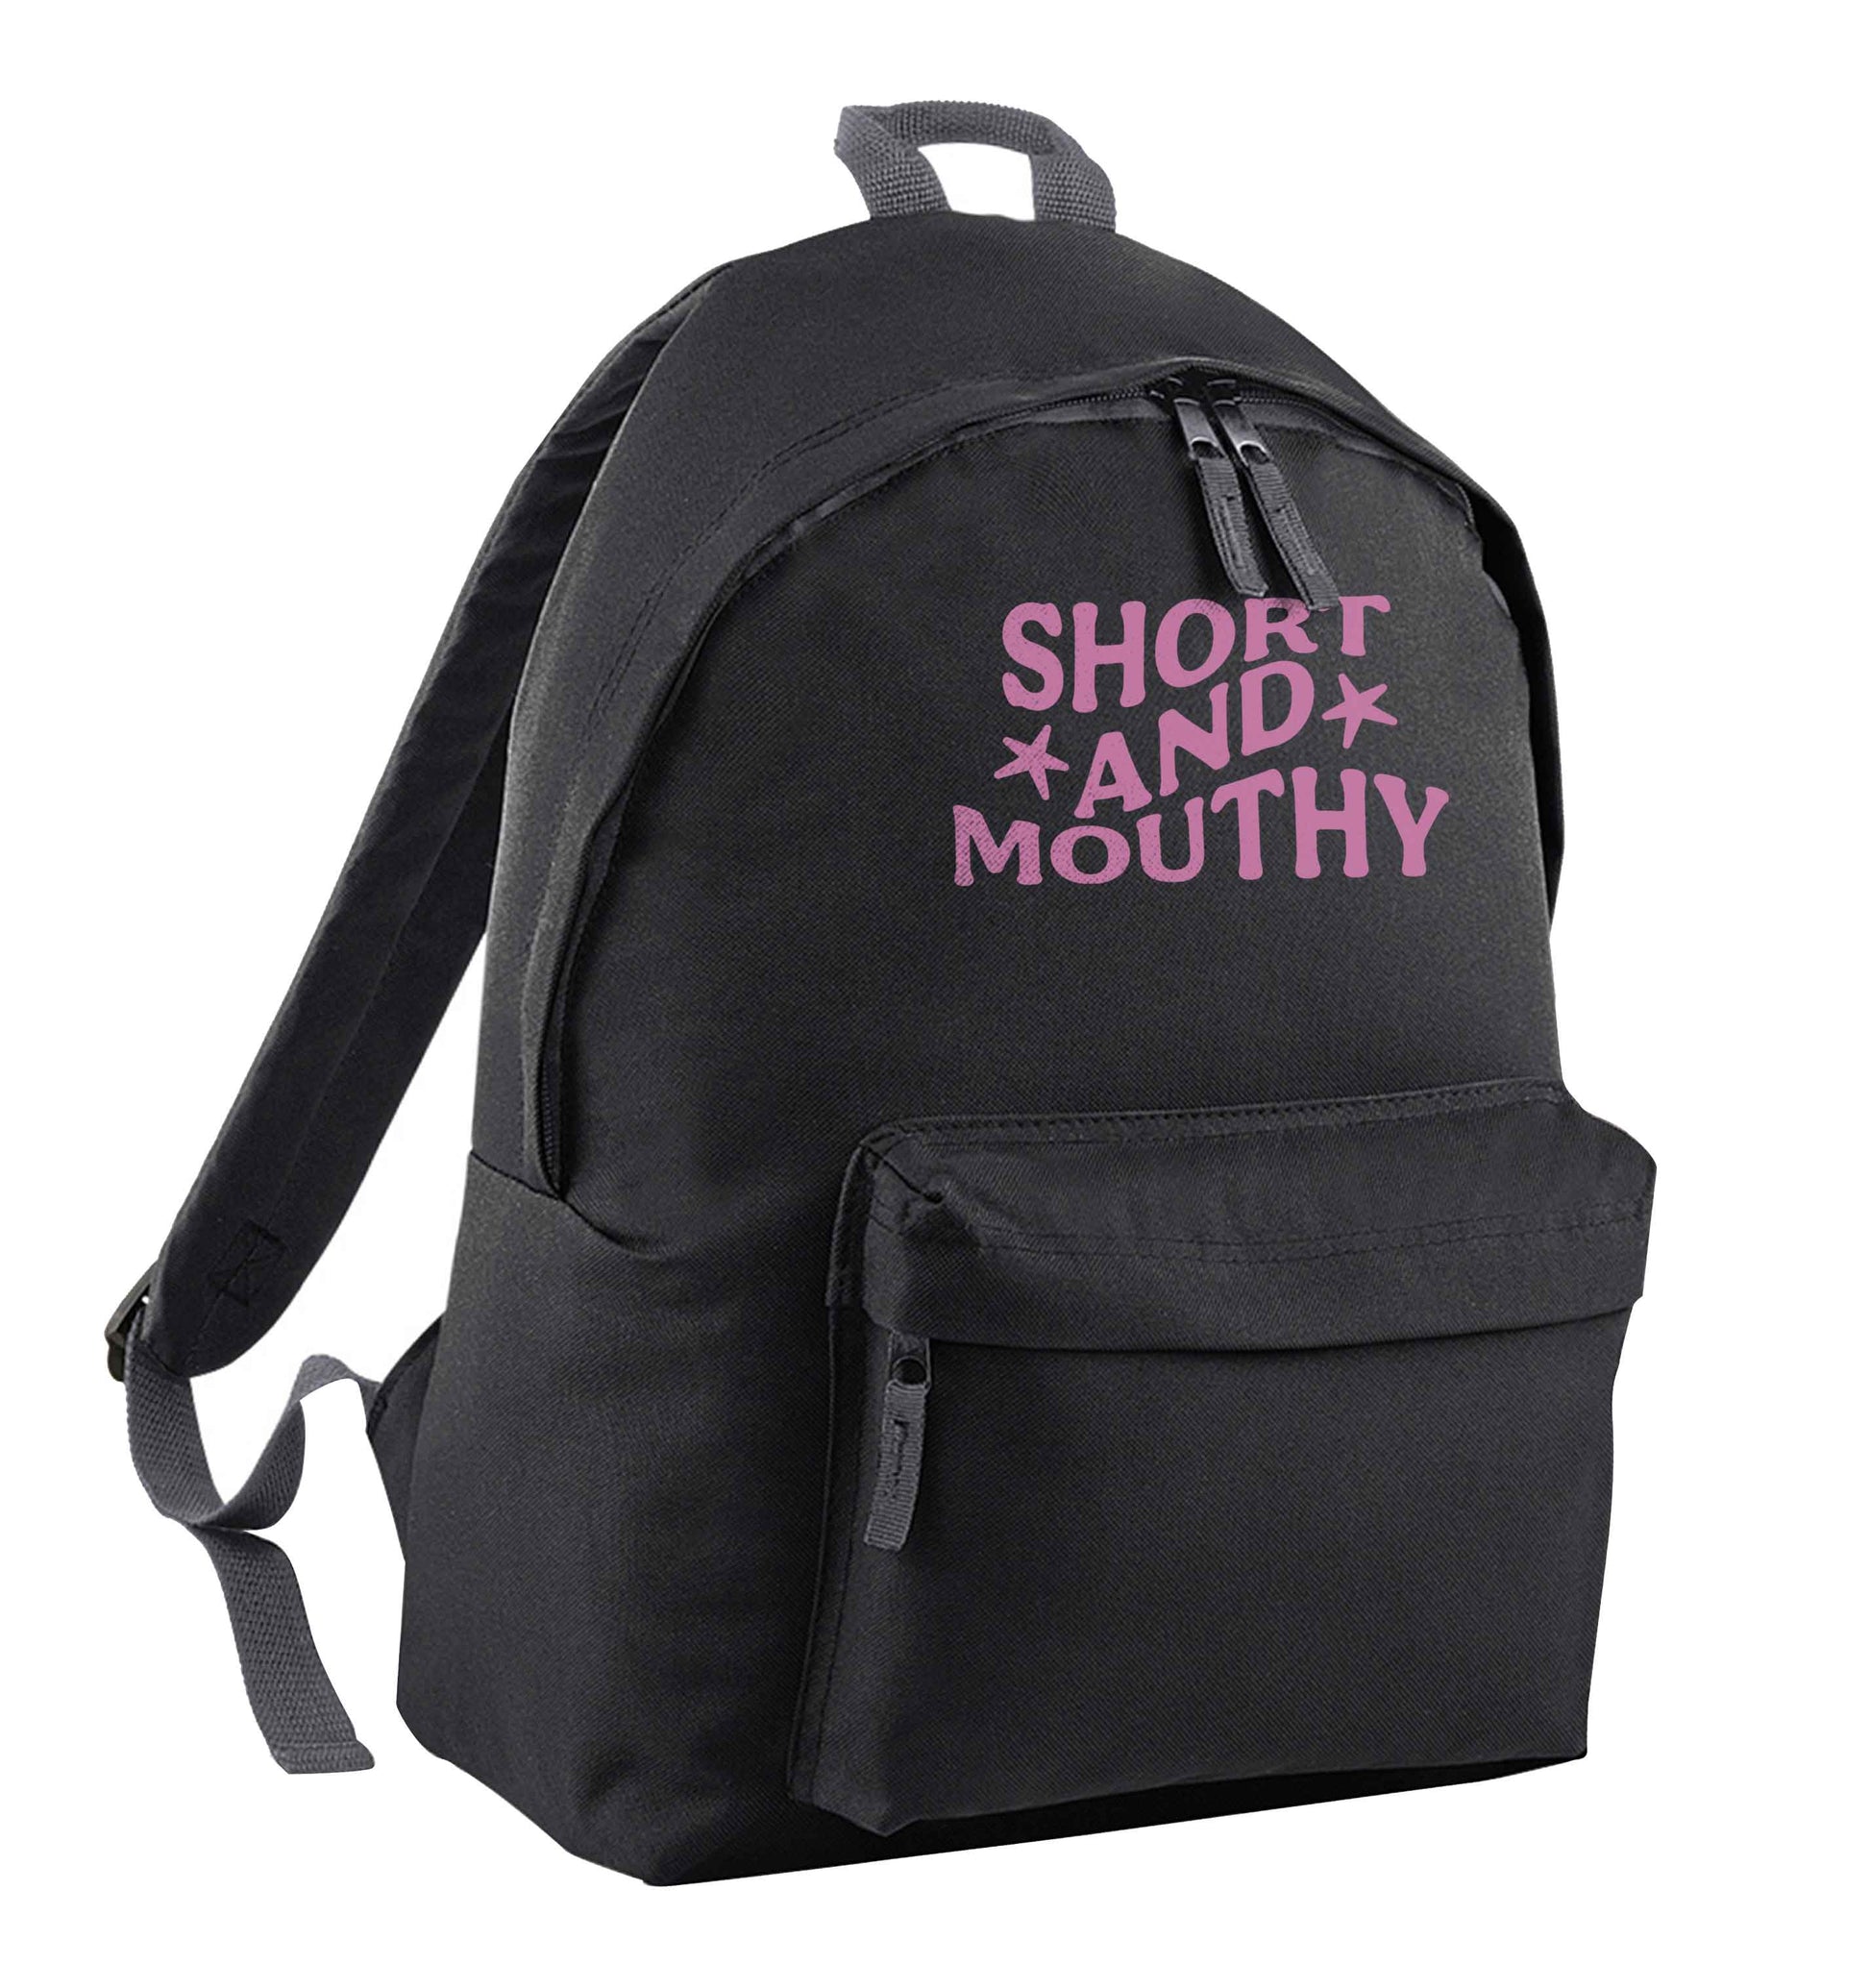 Short and mouthy black children's backpack